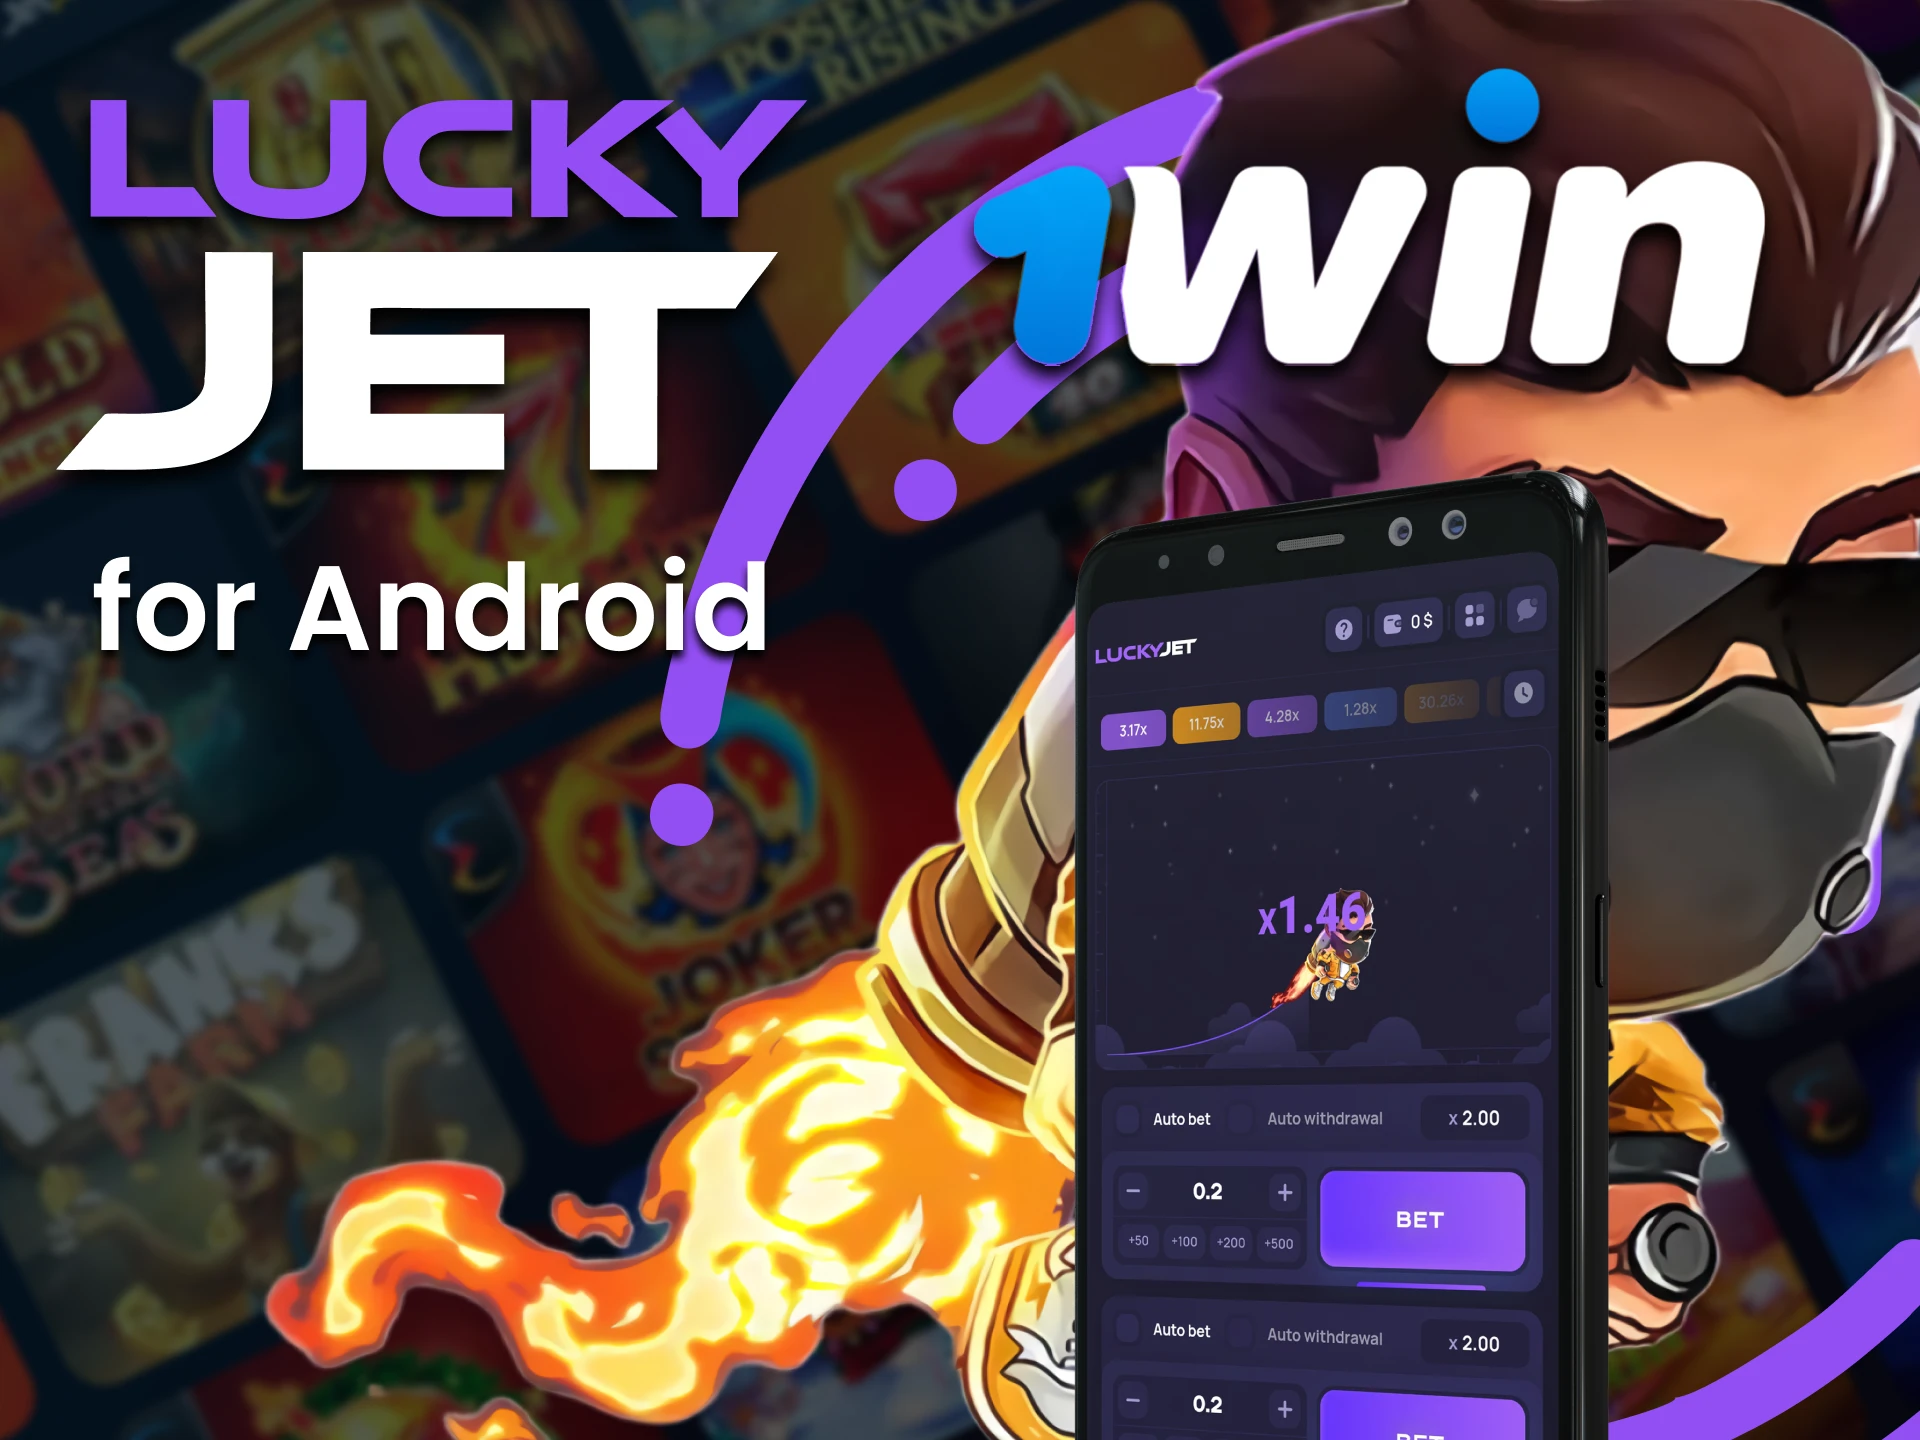 Download the 1Win app to play Lucky Jet on your Android device.